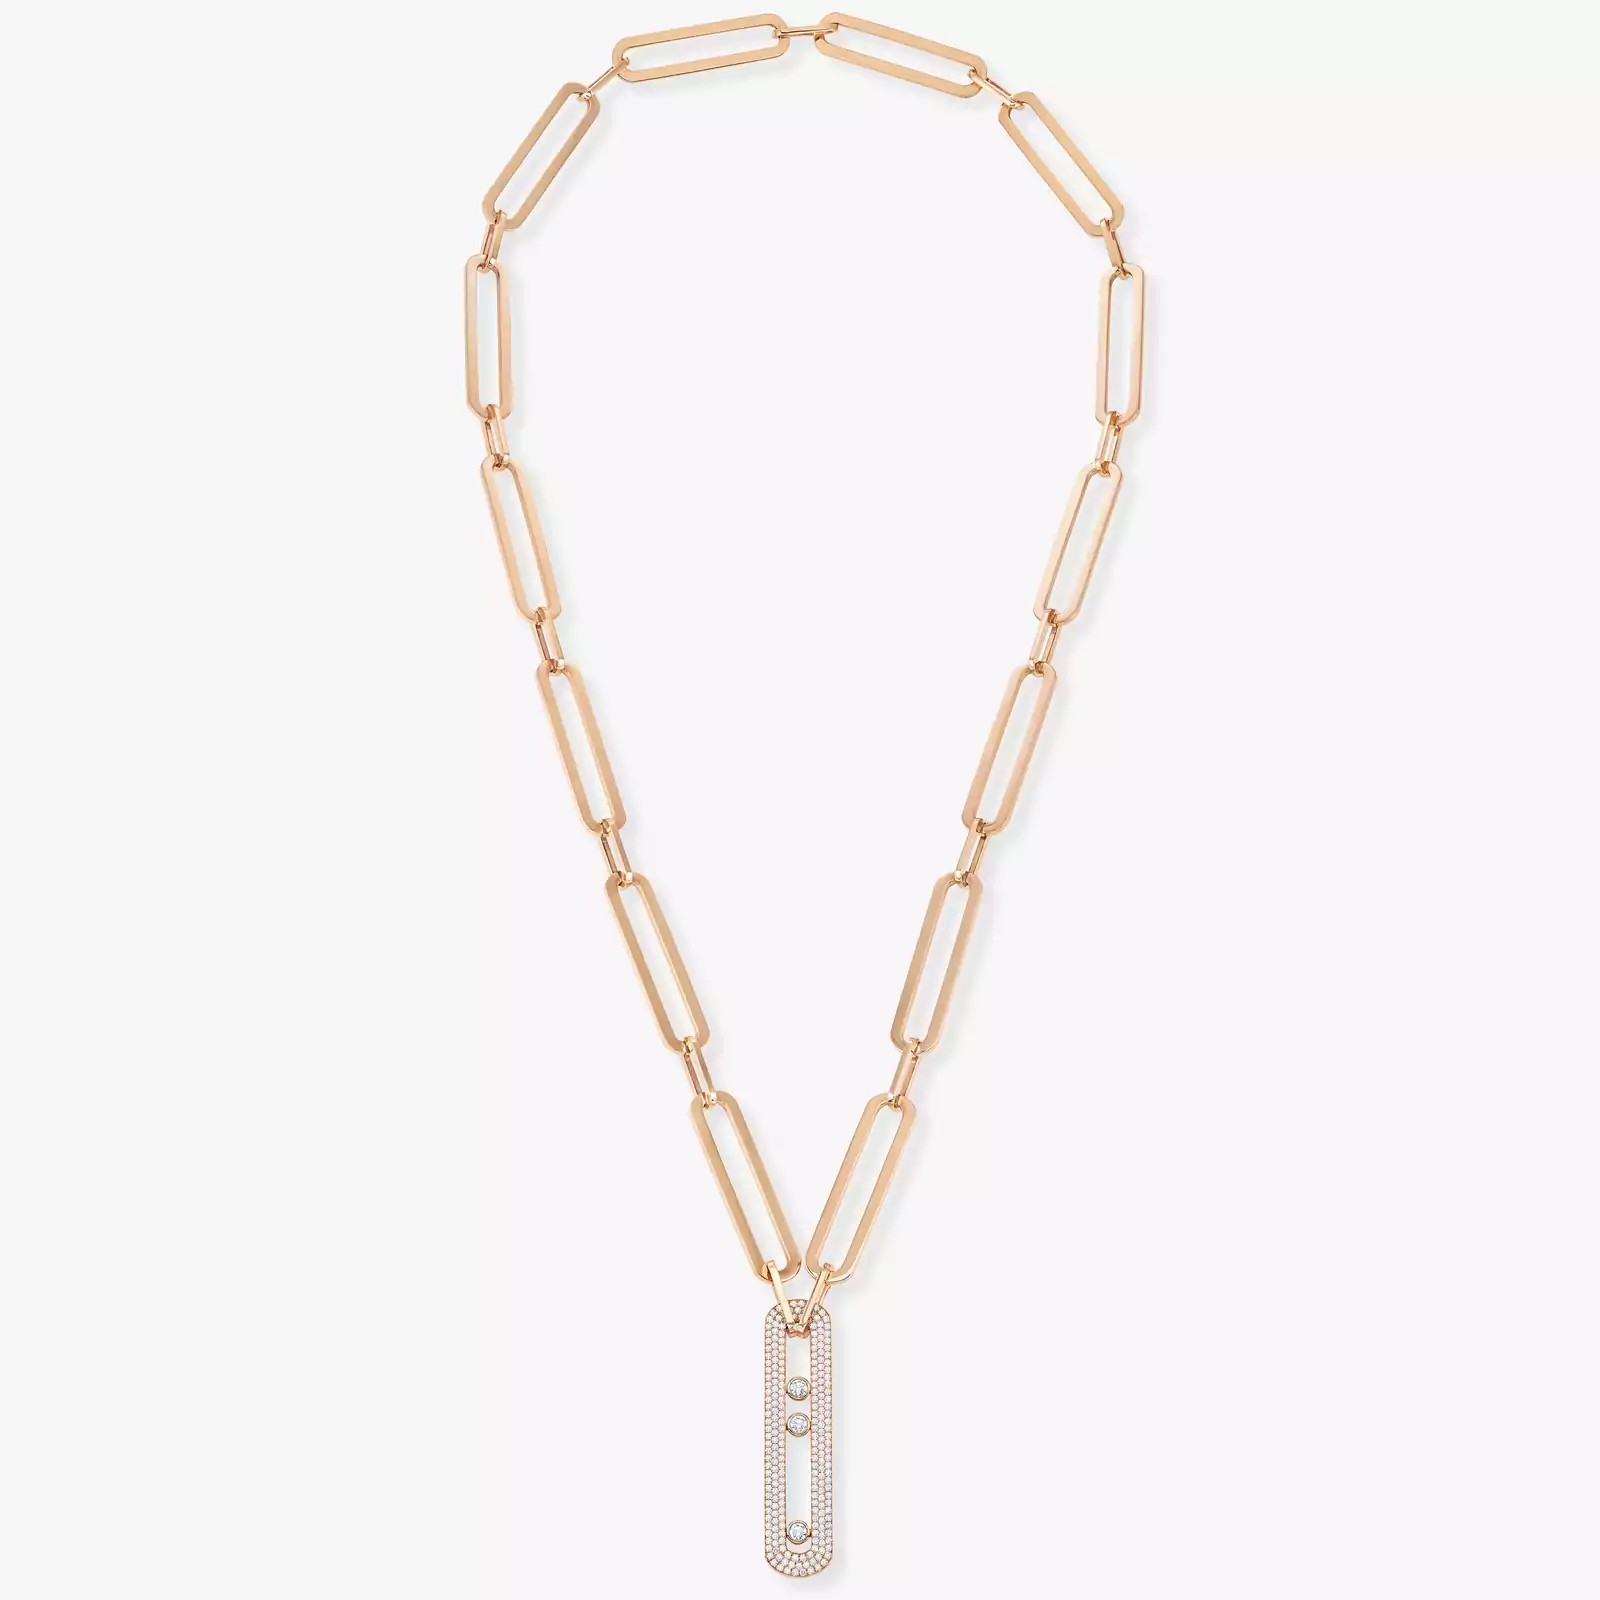 Move 10th Anniversary XL Rose Gold For Her Diamond Necklace 06768-PG